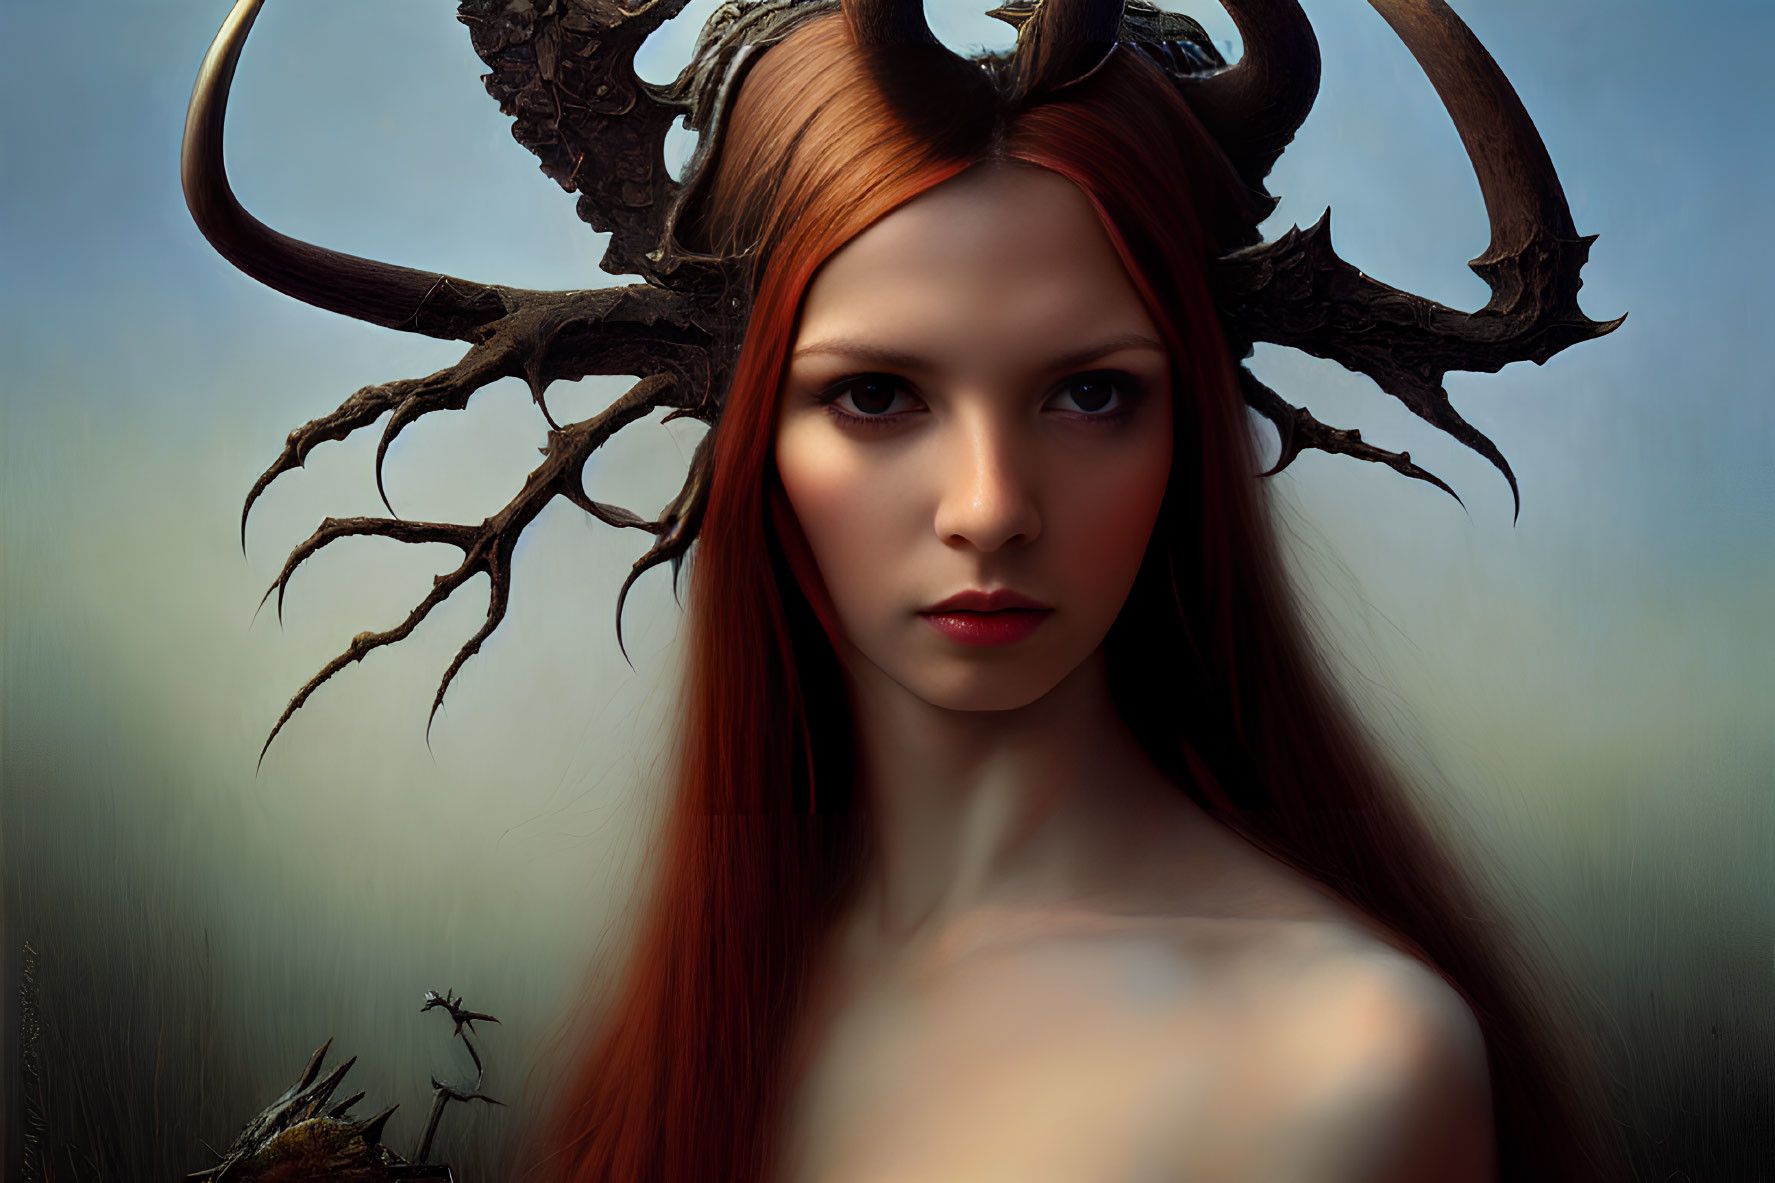 Portrait of a Woman with Red Hair and Antlers on Blue-Grey Background